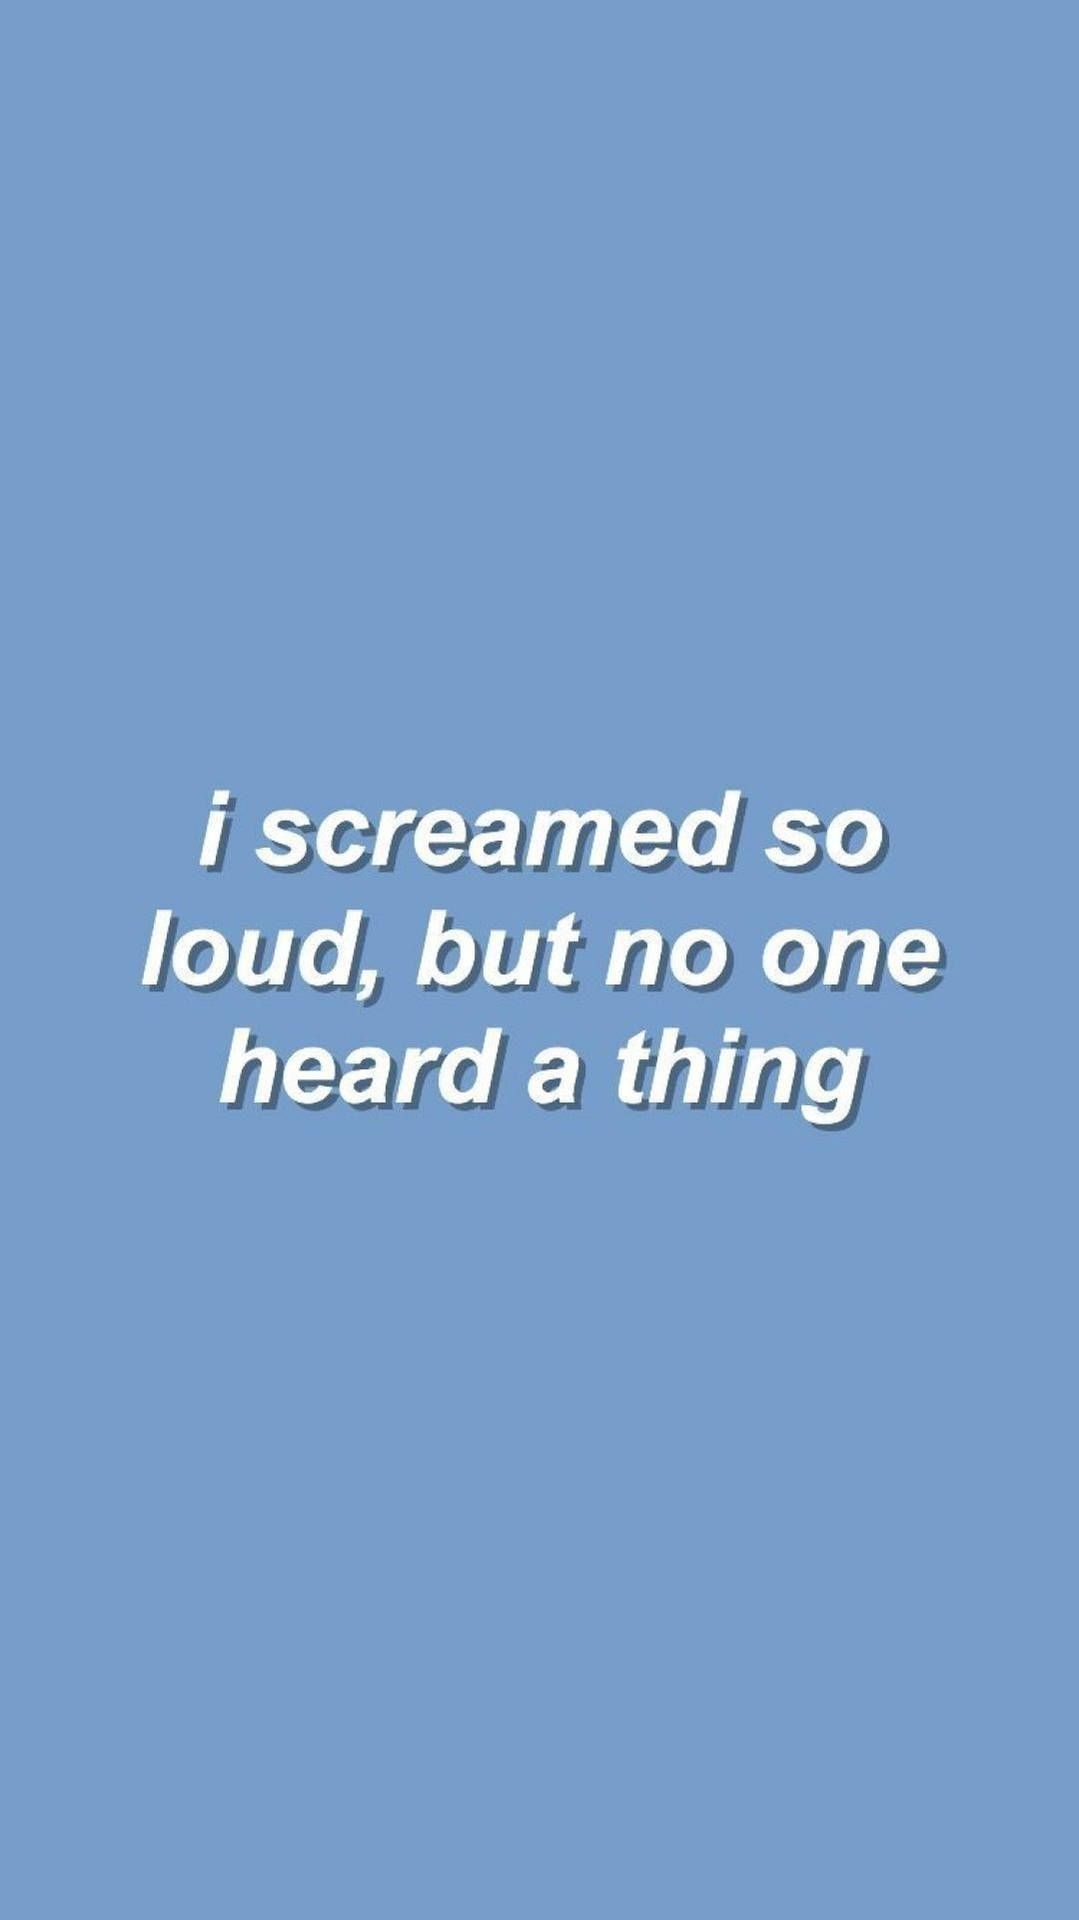 I screamed so loud, but no one heard a thing - Taylor Swift